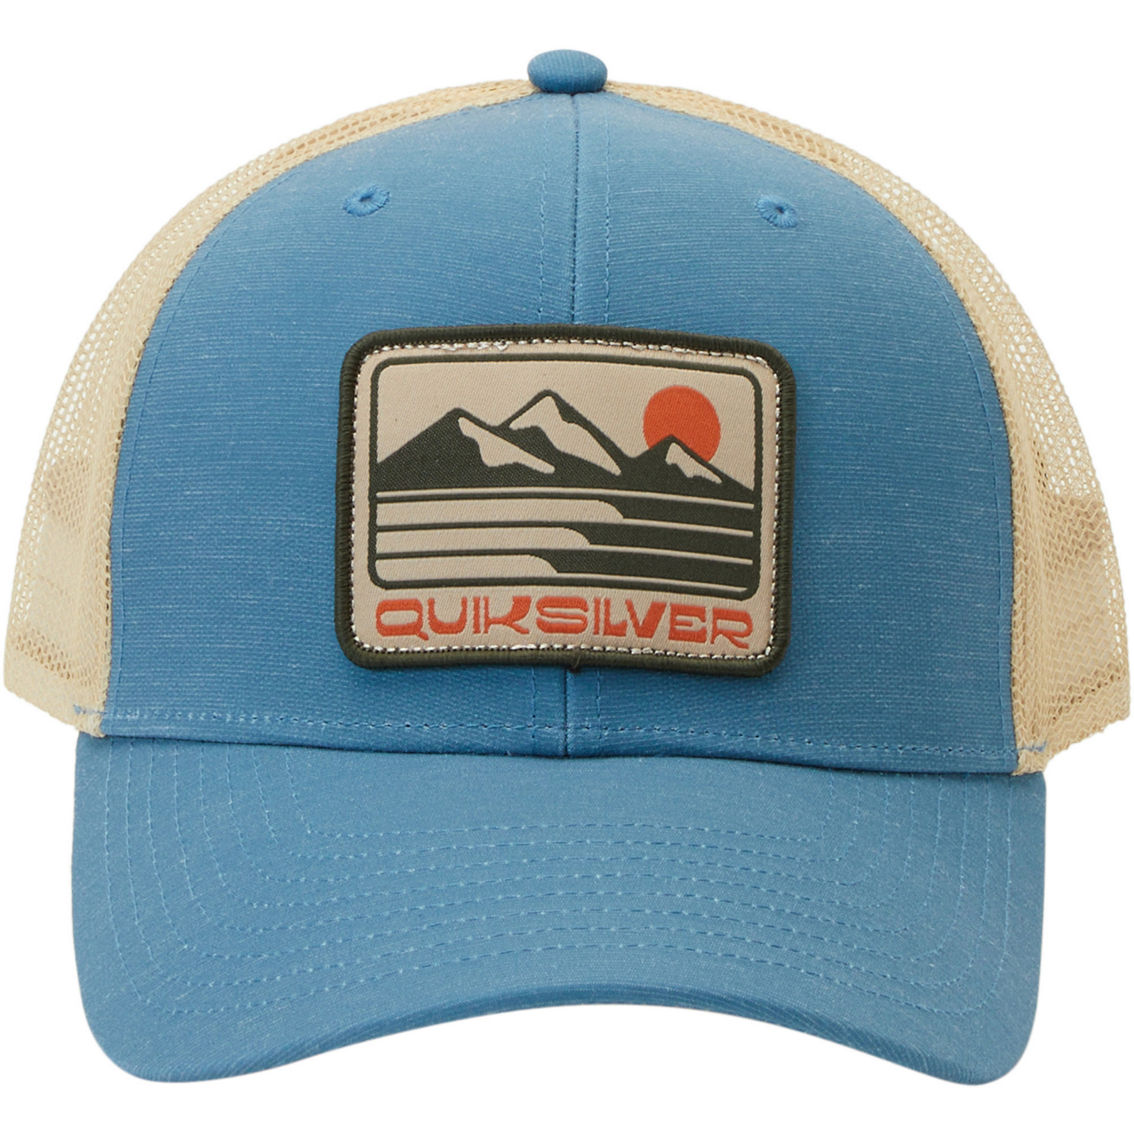 Quiksilver Weekend Rights Hat - Image 2 of 4